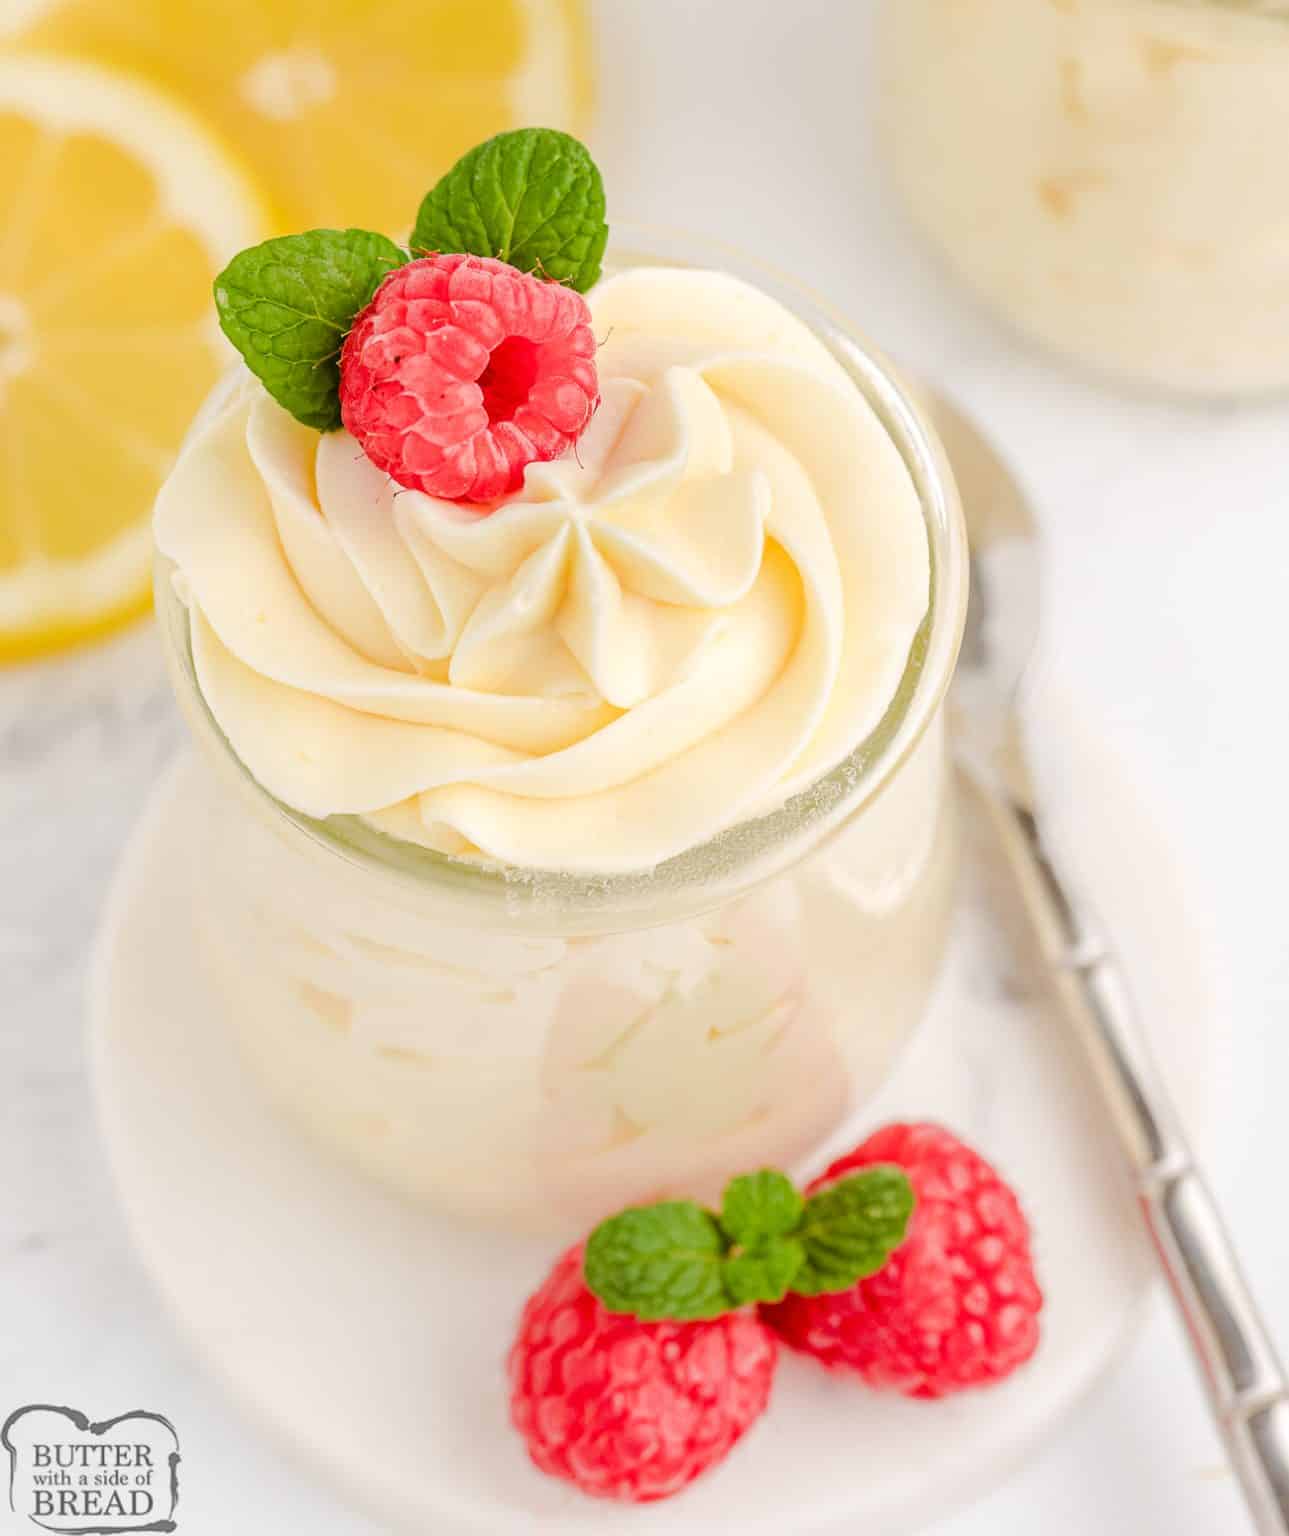 EASY LEMON MOUSSE - Butter with a Side of Bread